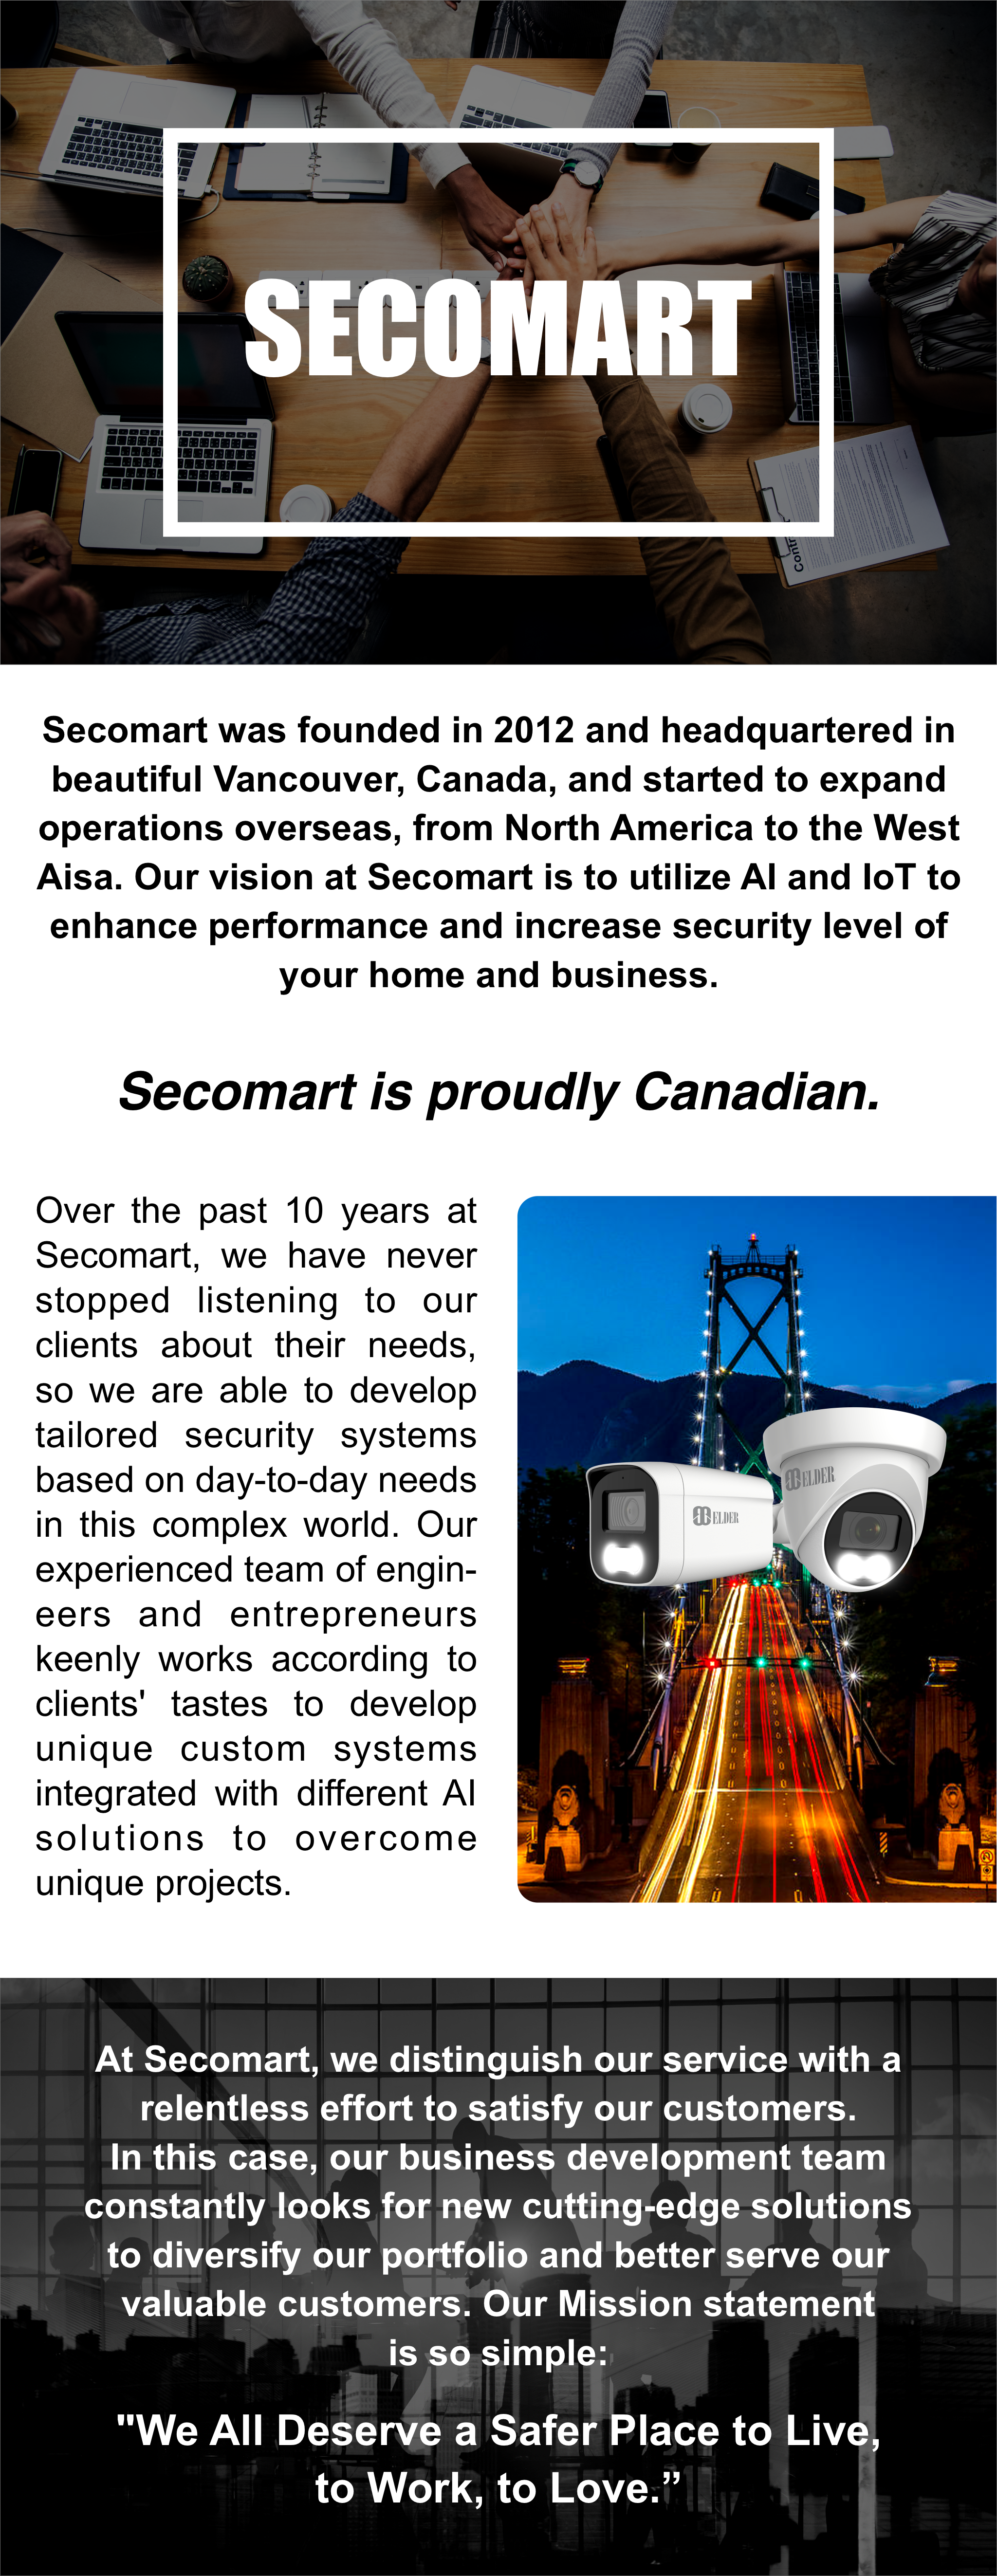 Secomart was founded in 2012 and headquartered in beautiful Vancouver, Canada, and started to expand operations overseas, from North America to the West Aisa. Secomart is one of the most admired and trusted suppliers of security camera systems, surveillance cameras, and smart home in Canada.